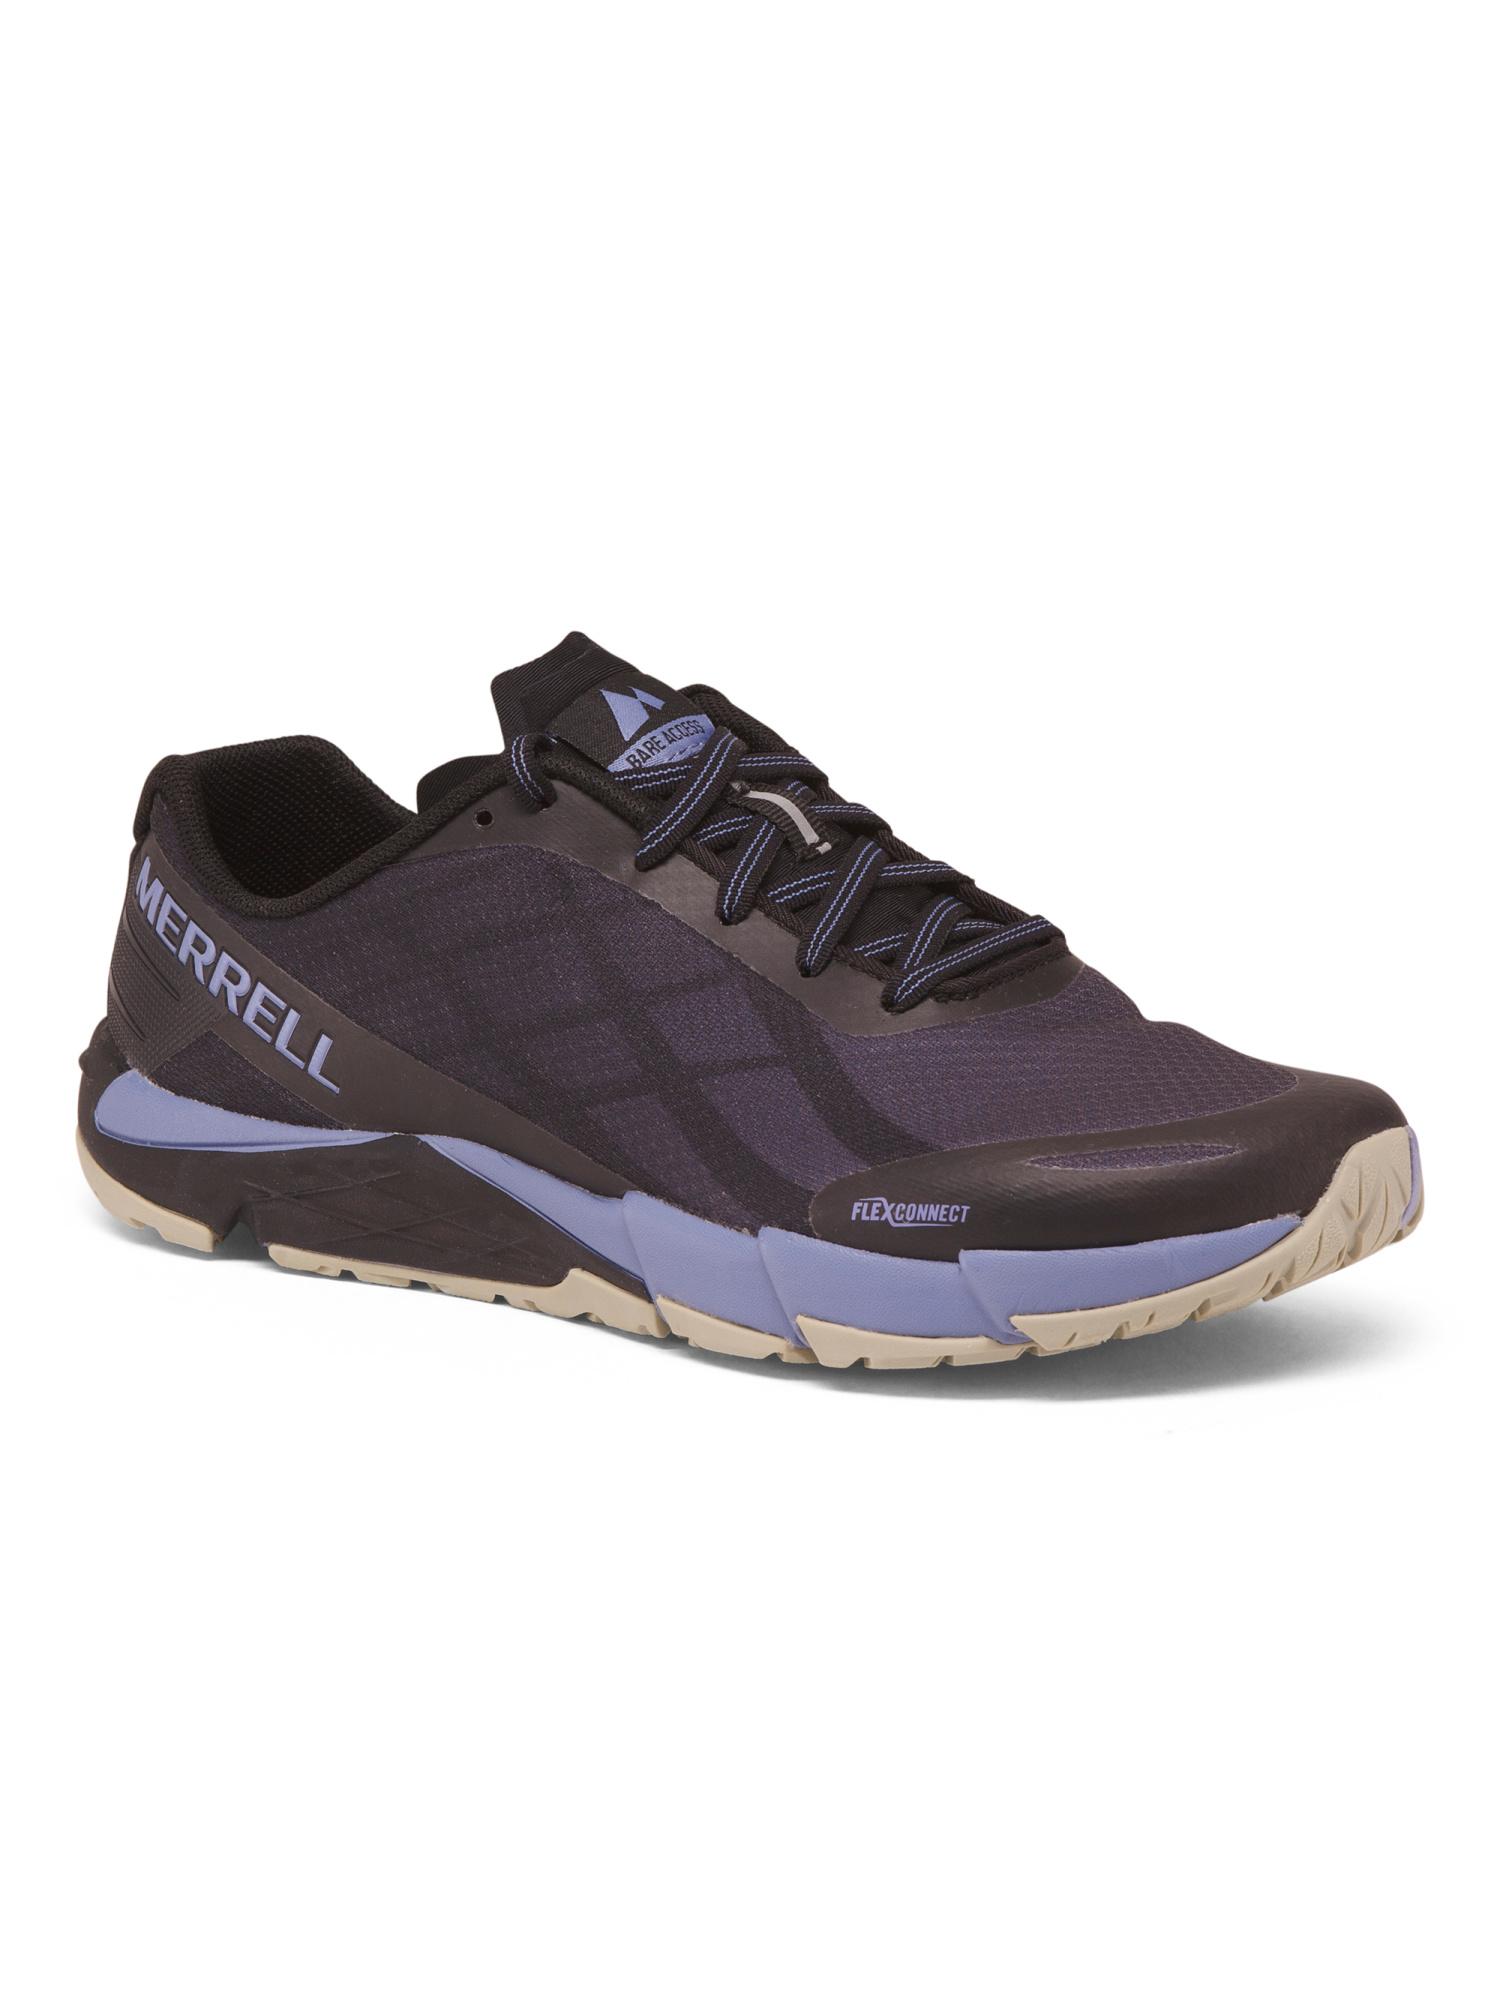 Tj Maxx Hybrid Performance Multi Surface Running Shoes in